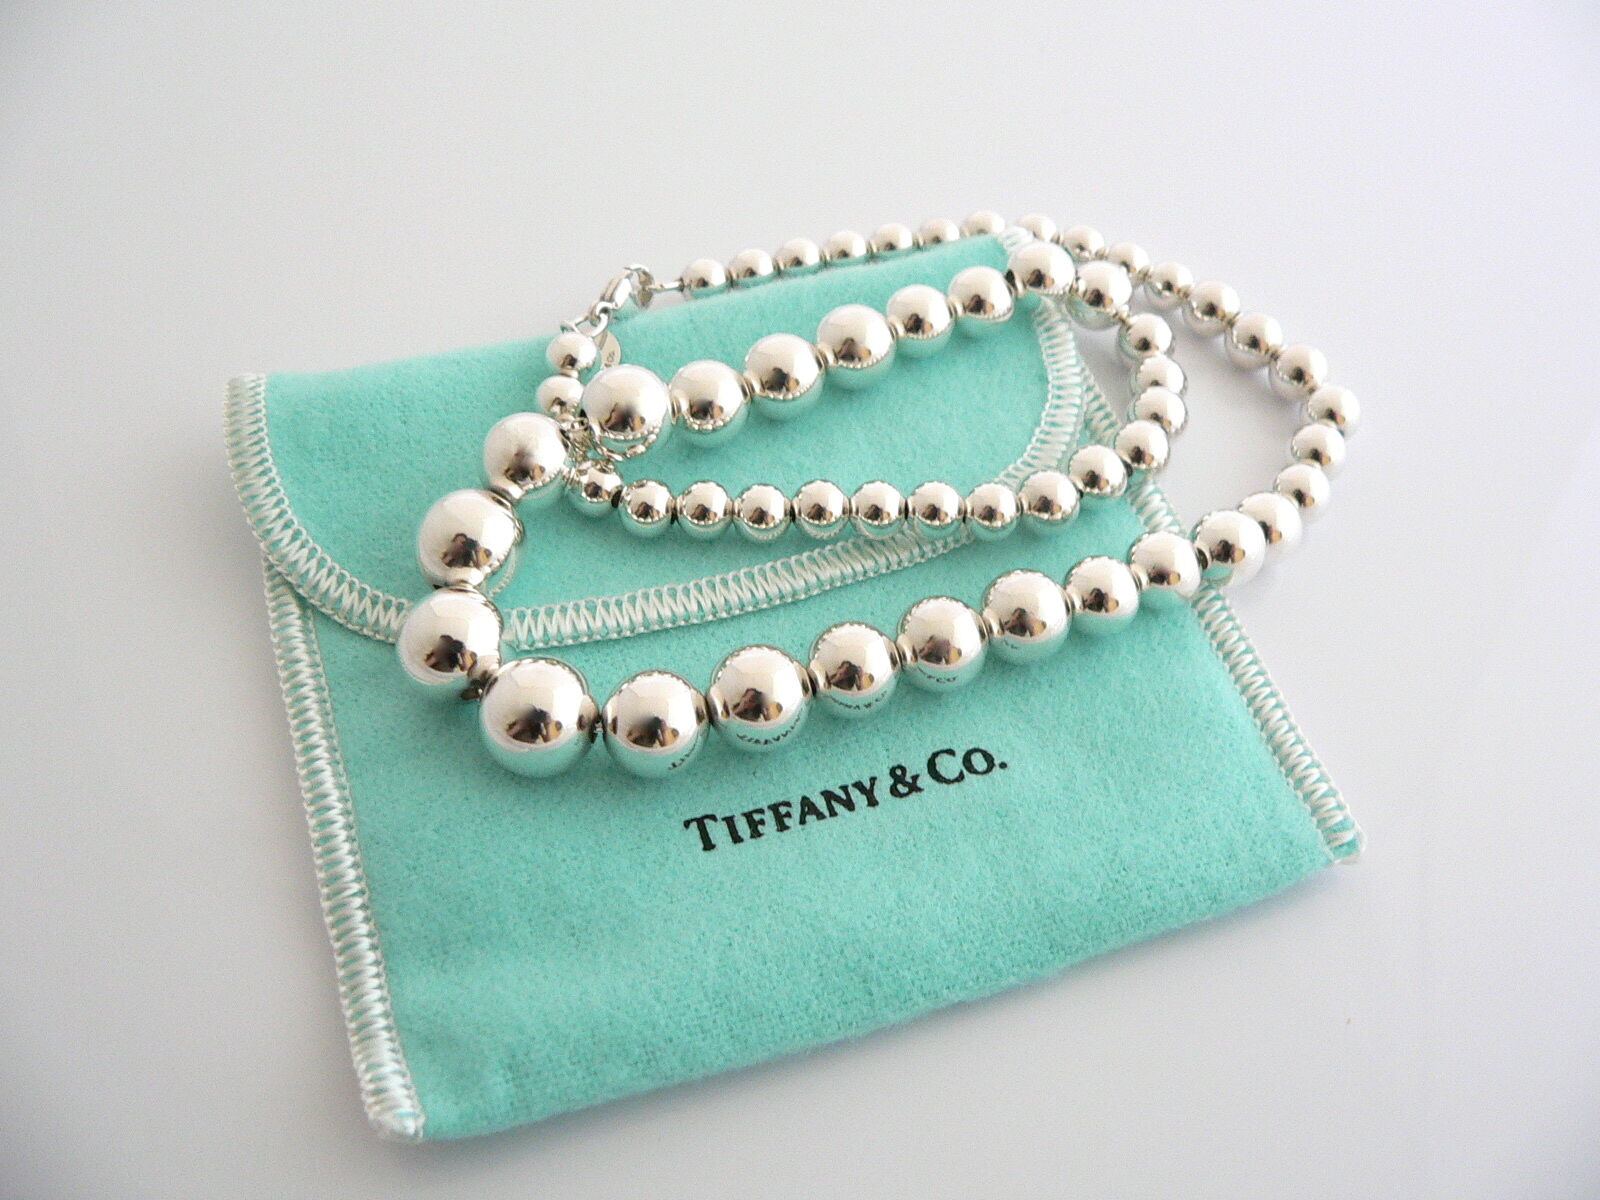 Tiffany & Co Graduated Ball Bead Necklace Chain Pendant Excellent Silver Gift